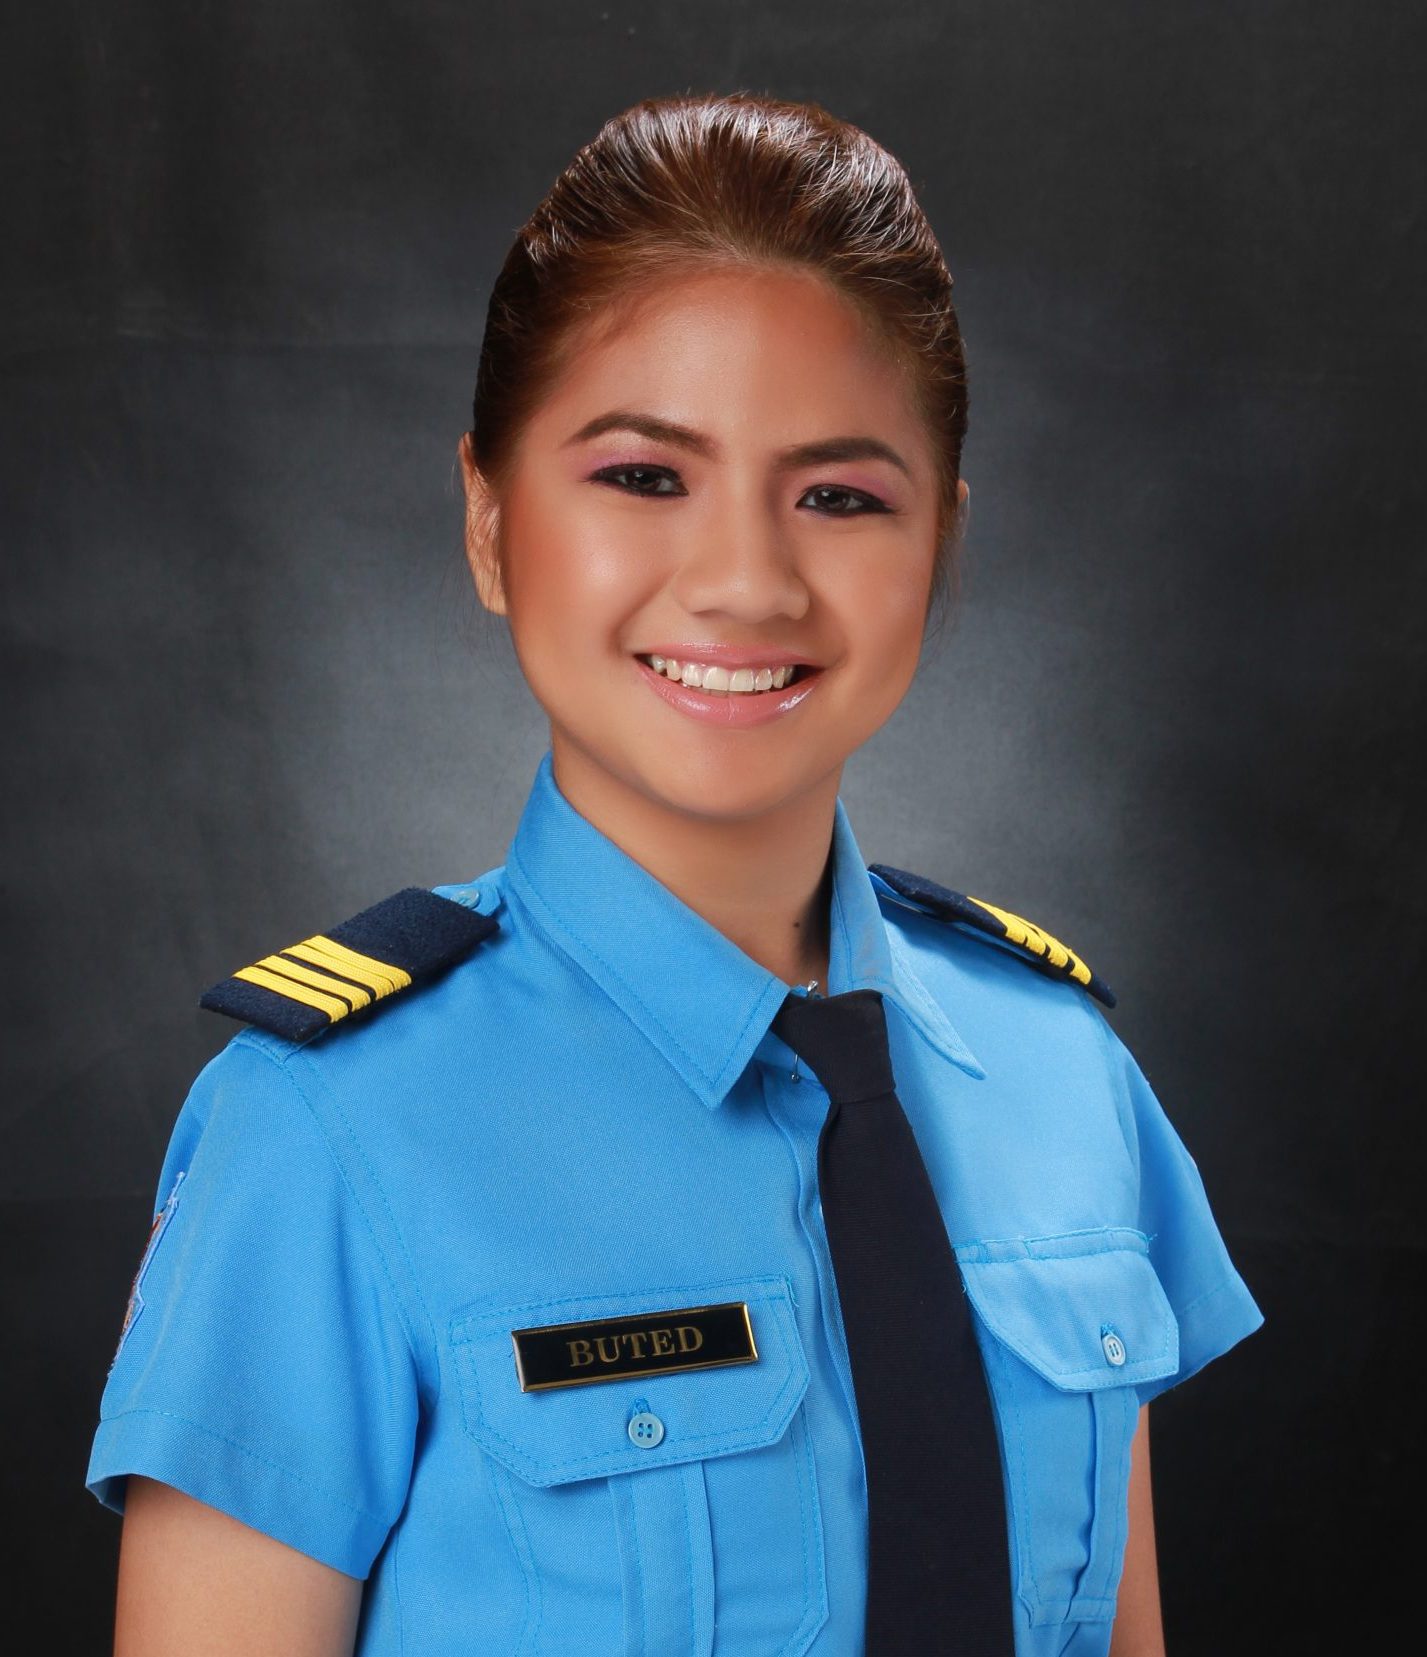 Buted Is Top In December Criminologist Licensure Exam Lyceum Of The Philippines